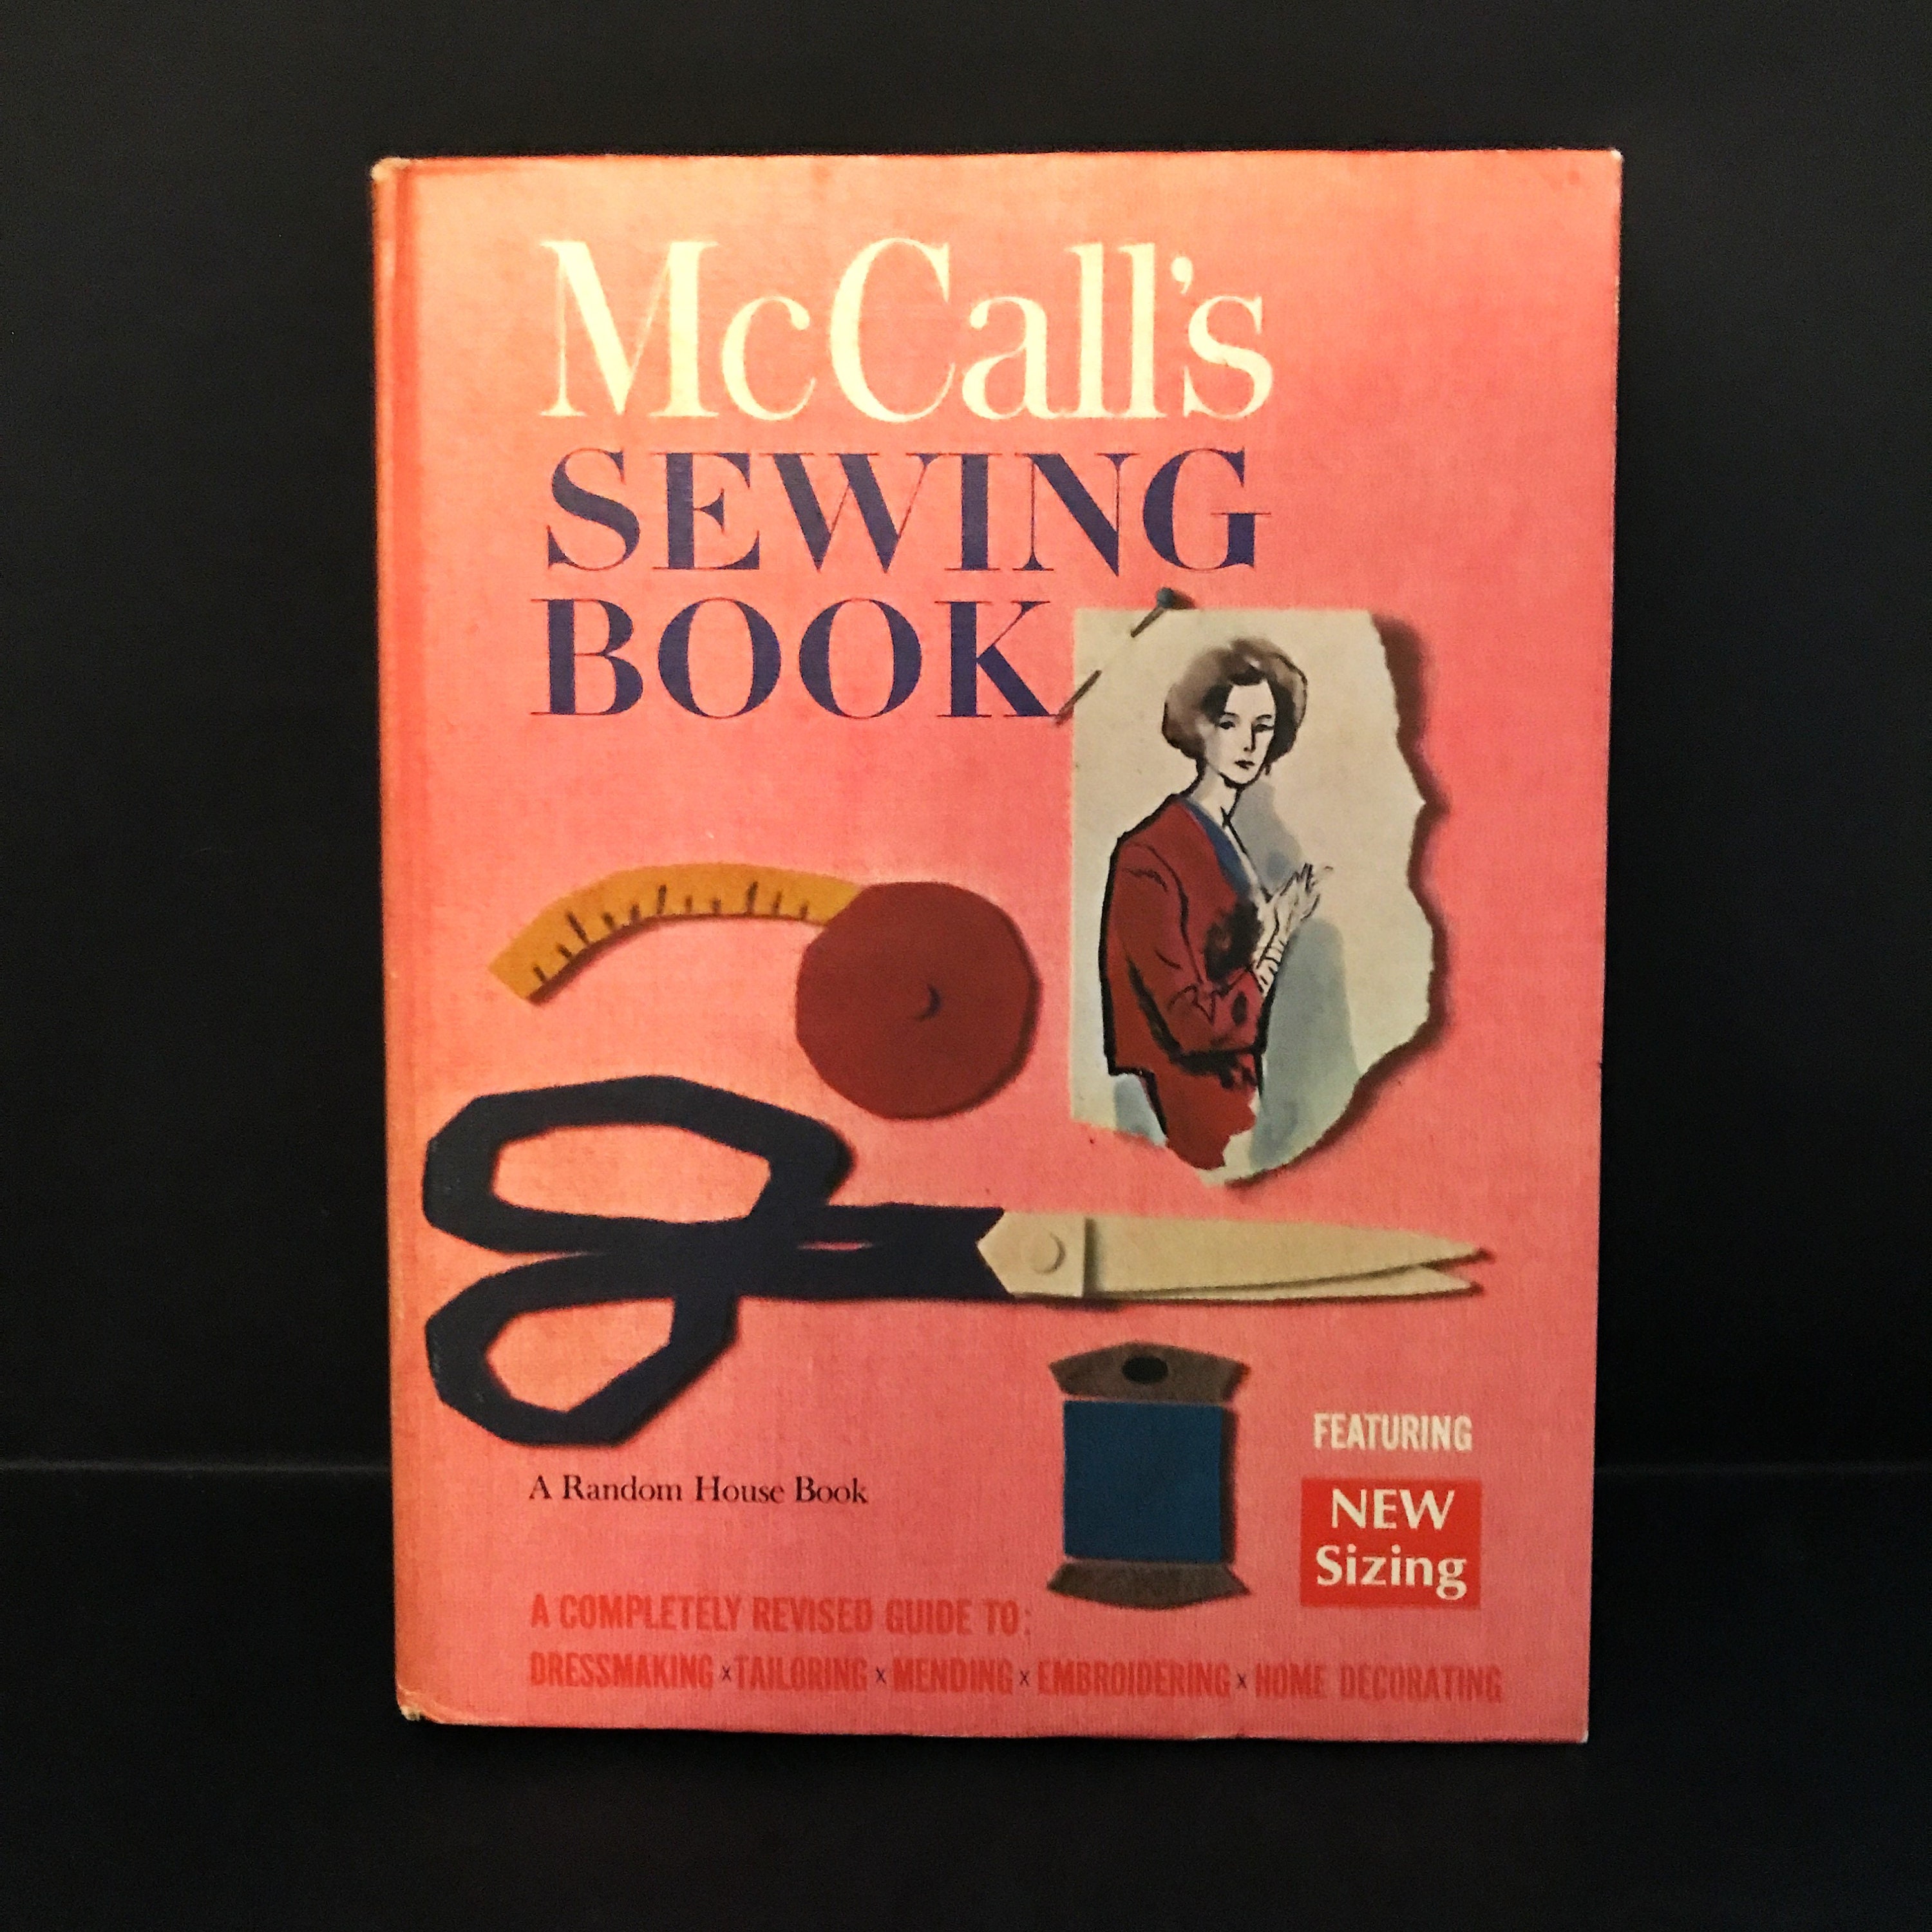 McCall's Sewing Book.